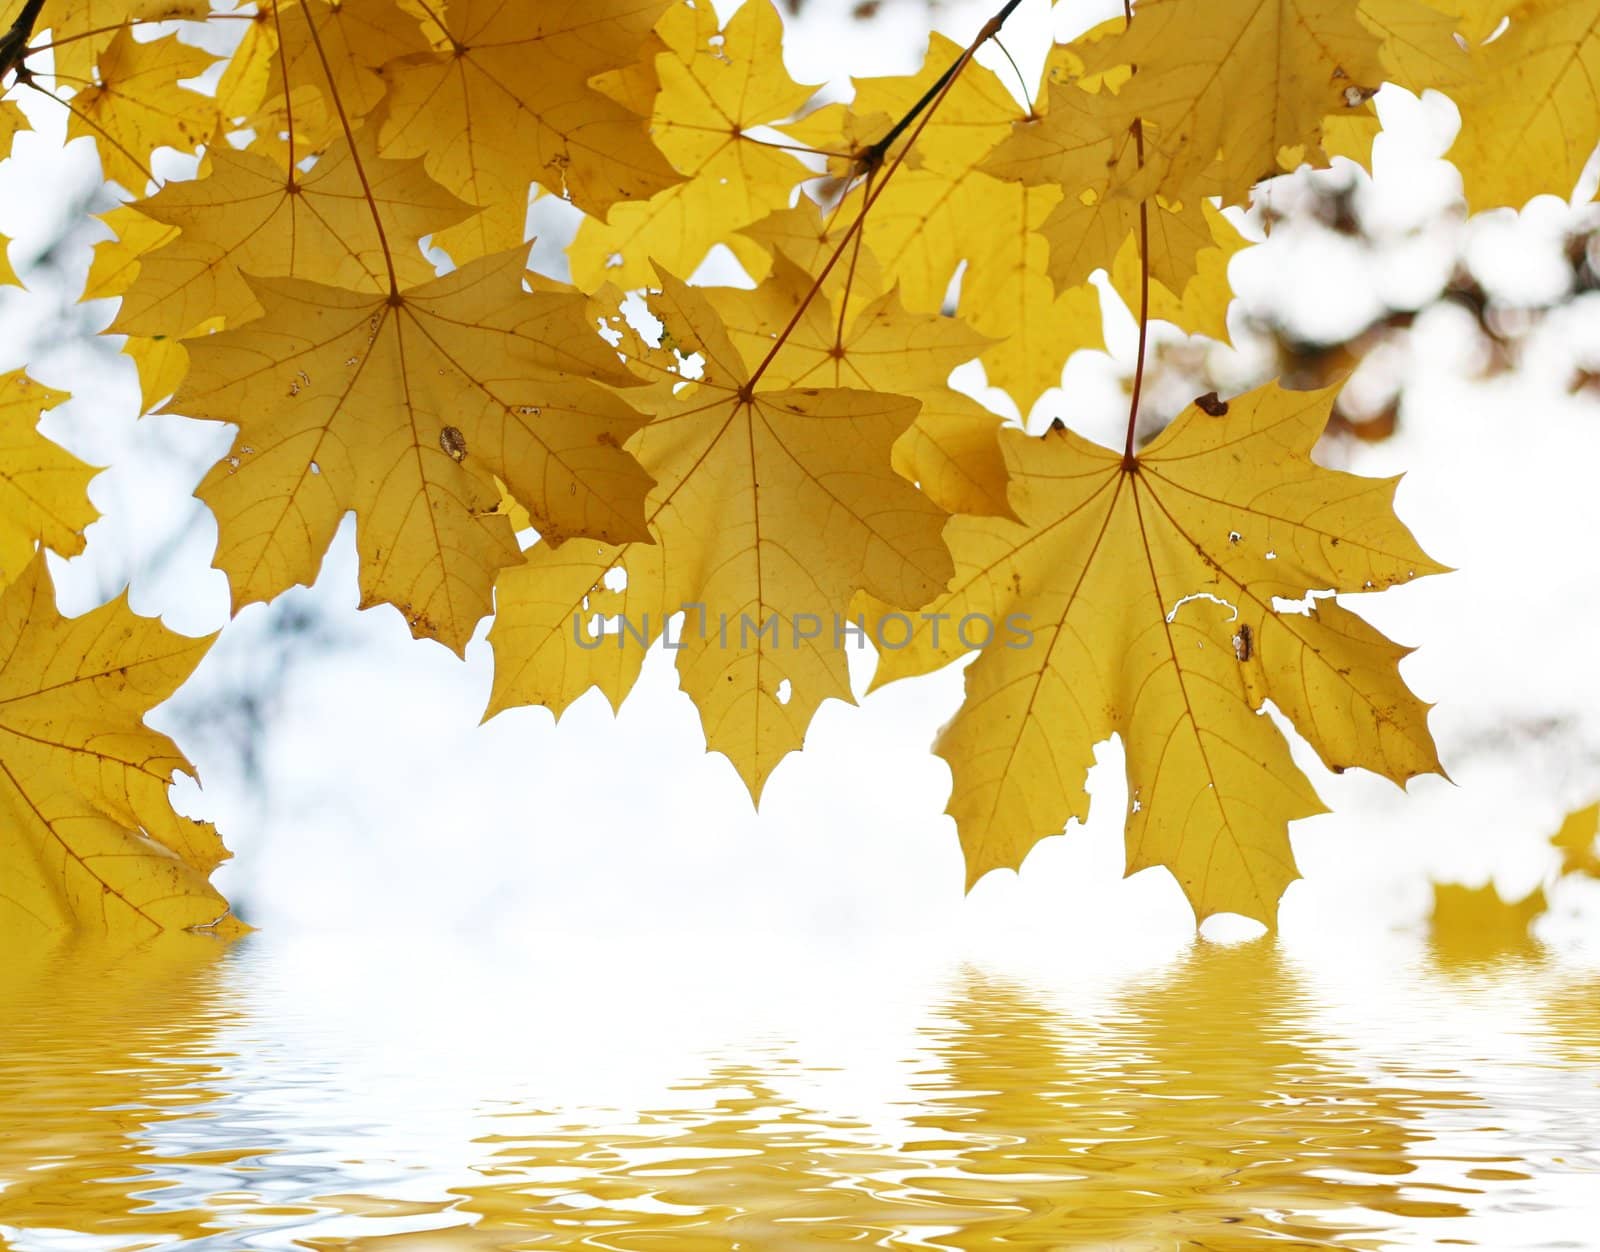 Autumn leafs above the water - fall background